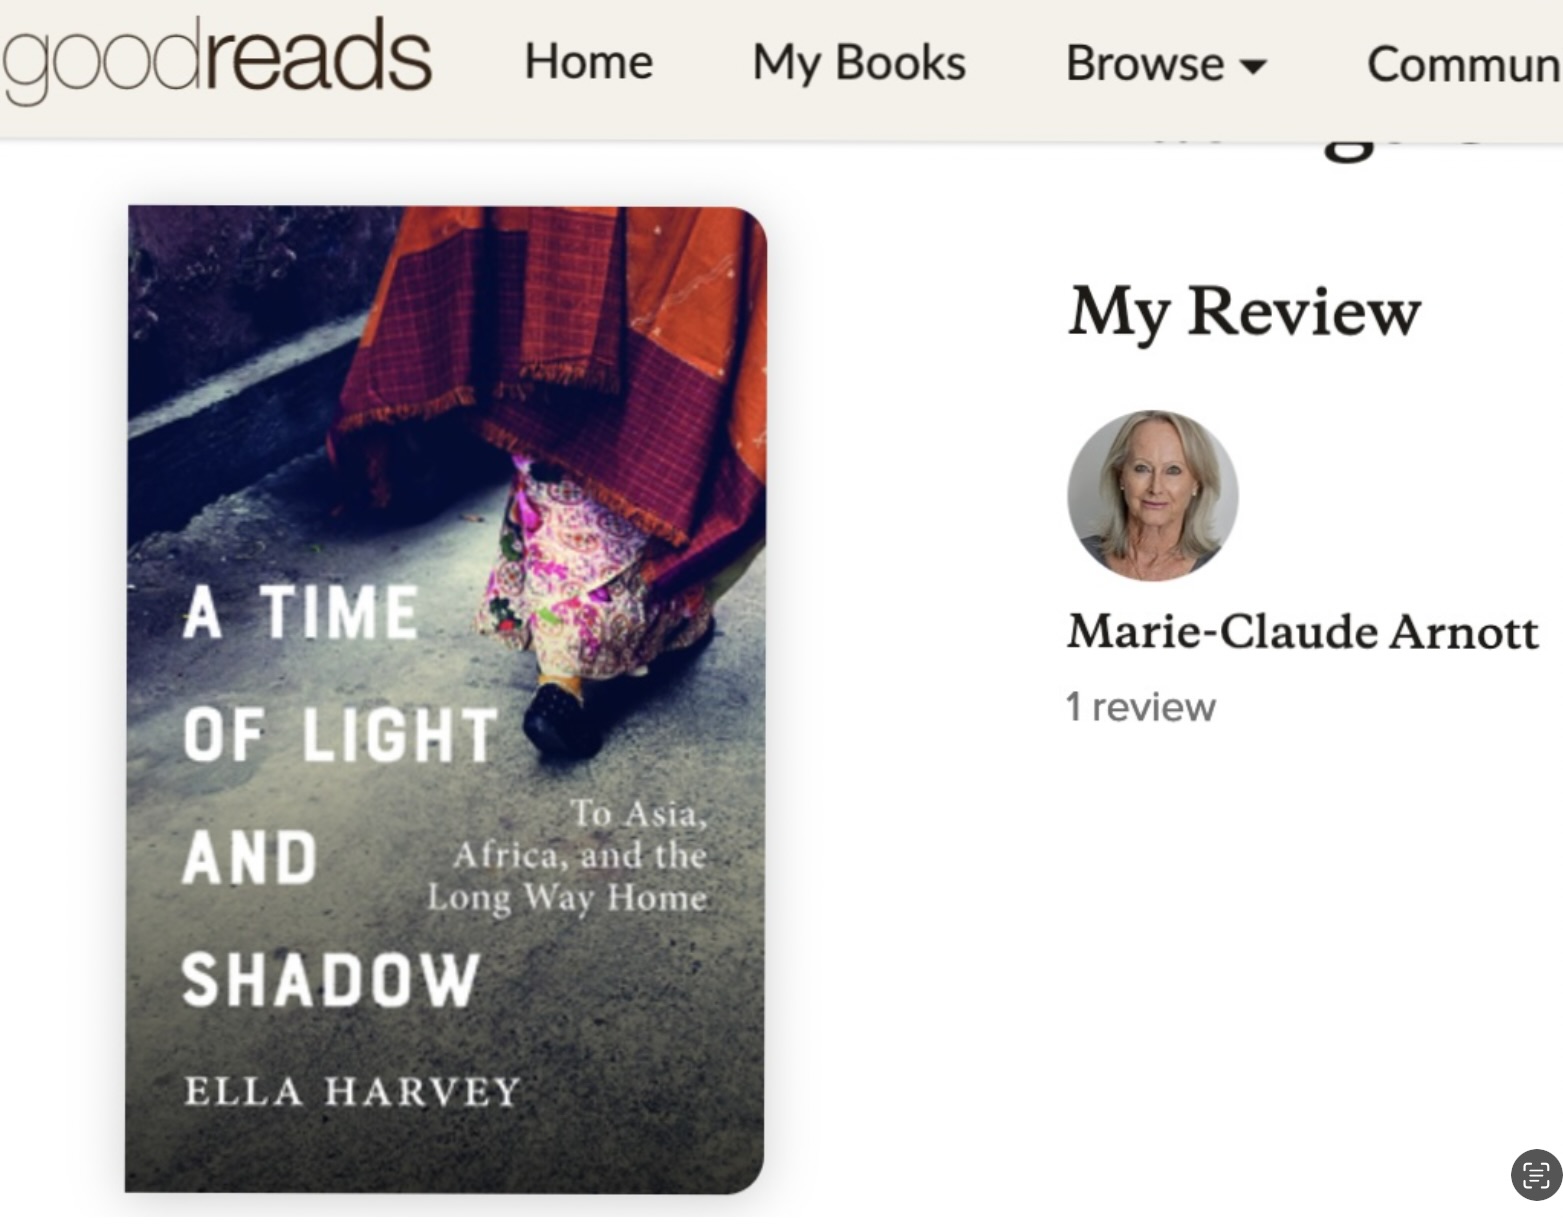 A Time of Light and Shadow — by Ella Harvey